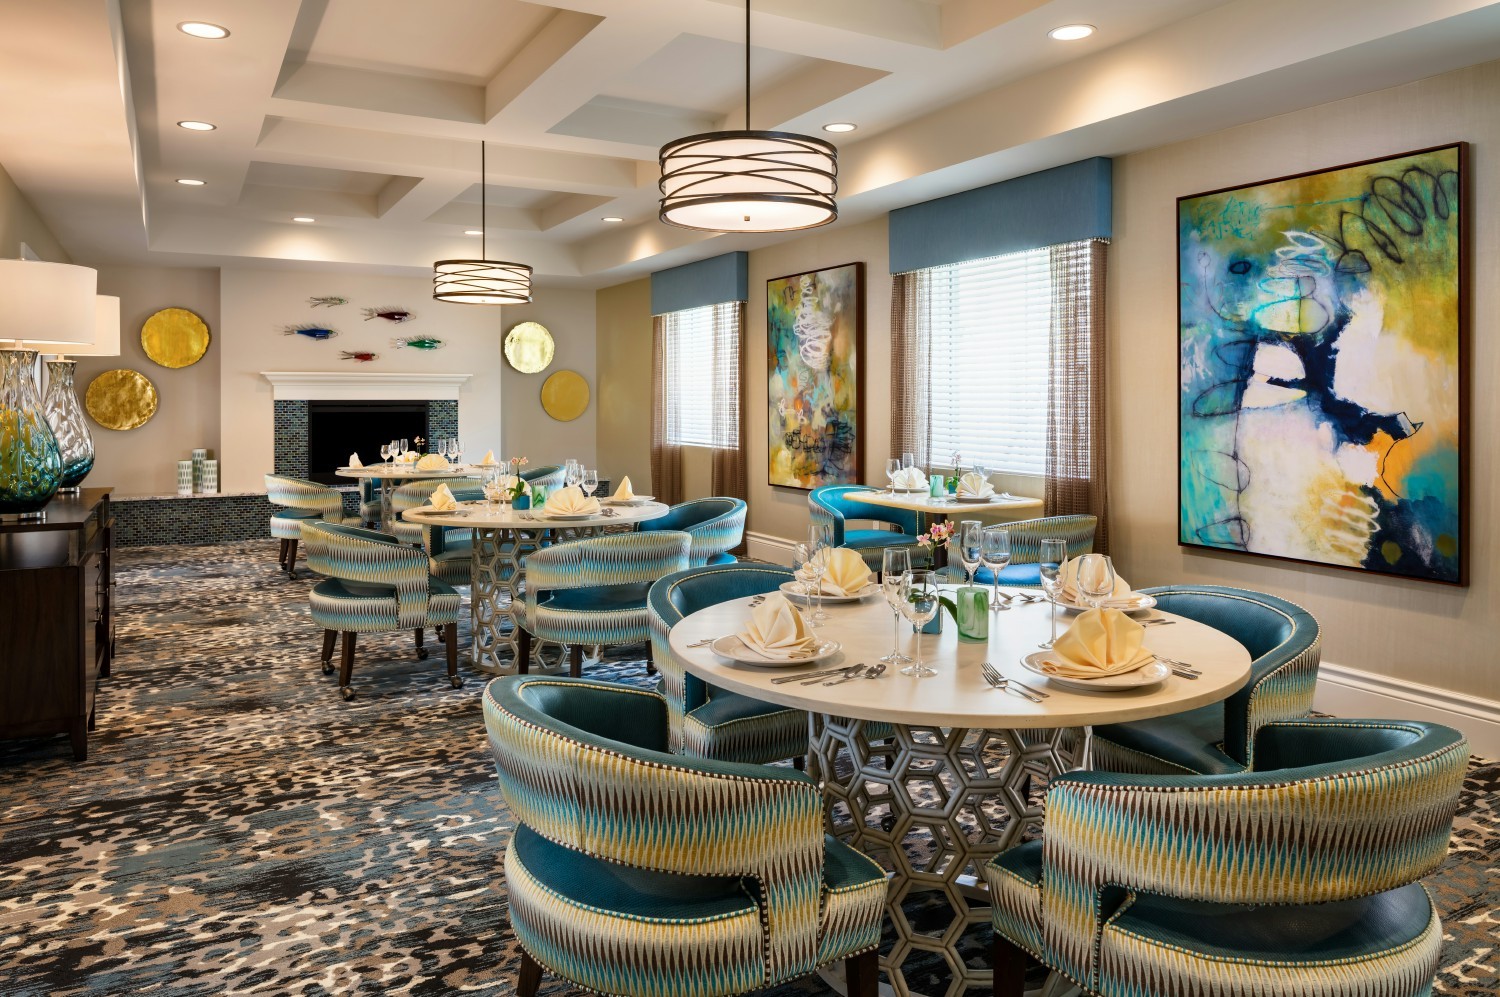 The Grill Room at HarborChase of Palm Beach Gardens, FL.